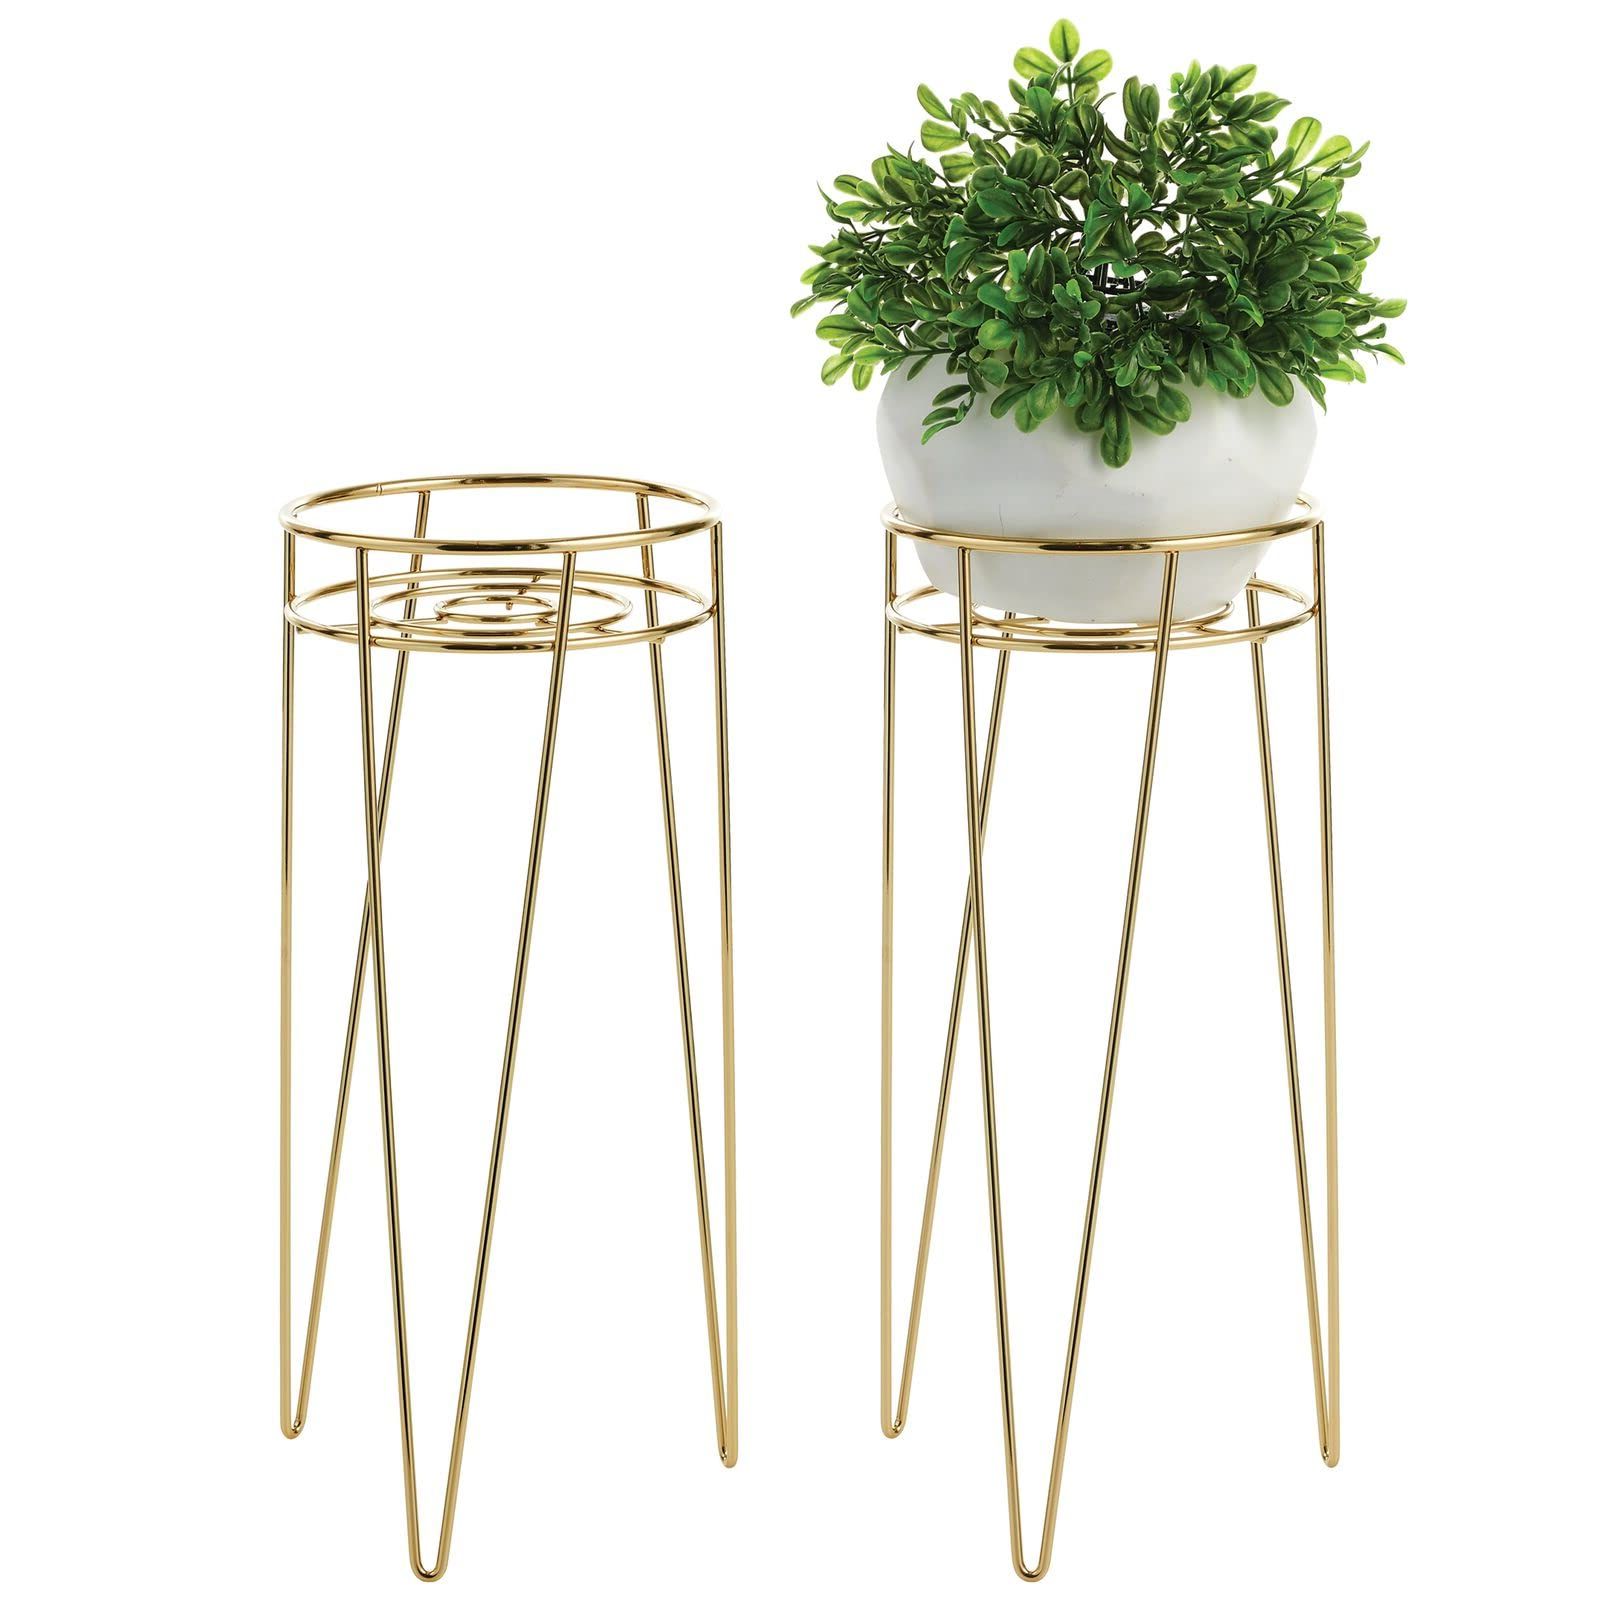 Brass Plant Stands With Most Recently Released Mdesign Steel Modern 17" Plant Stand Holder With Hairpin Legs – Display  Indoor/outdoor Plants, Flowers, Succulents On Shelf, Balcony, Patio,  Garden, Office, Concerto Collection, 2 Pack, Soft Brass (Photo 2 of 10)